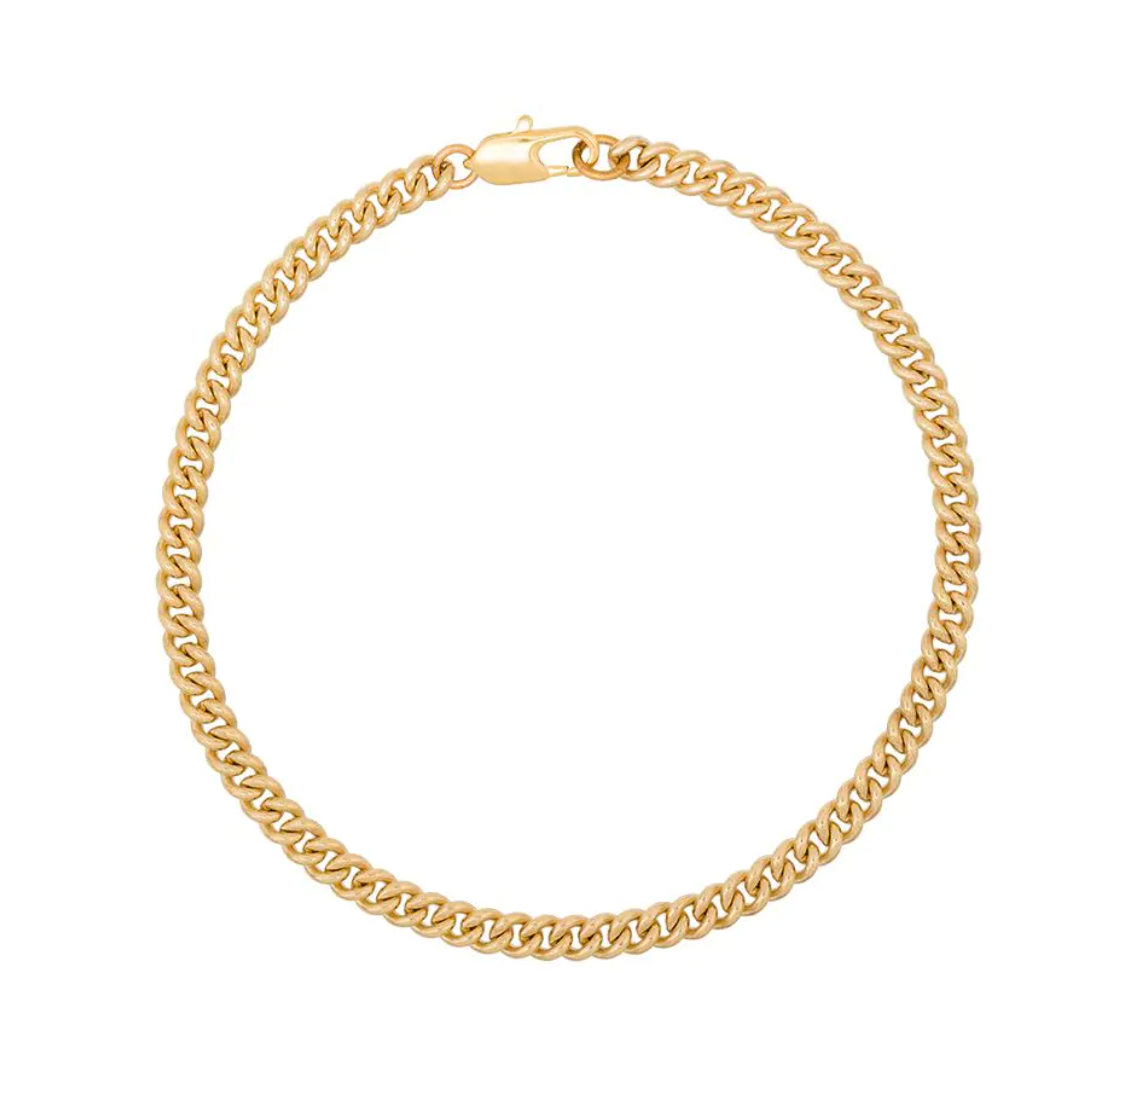 Shop 10 Jewelry Selects That Mom Would Love For Mother's Day